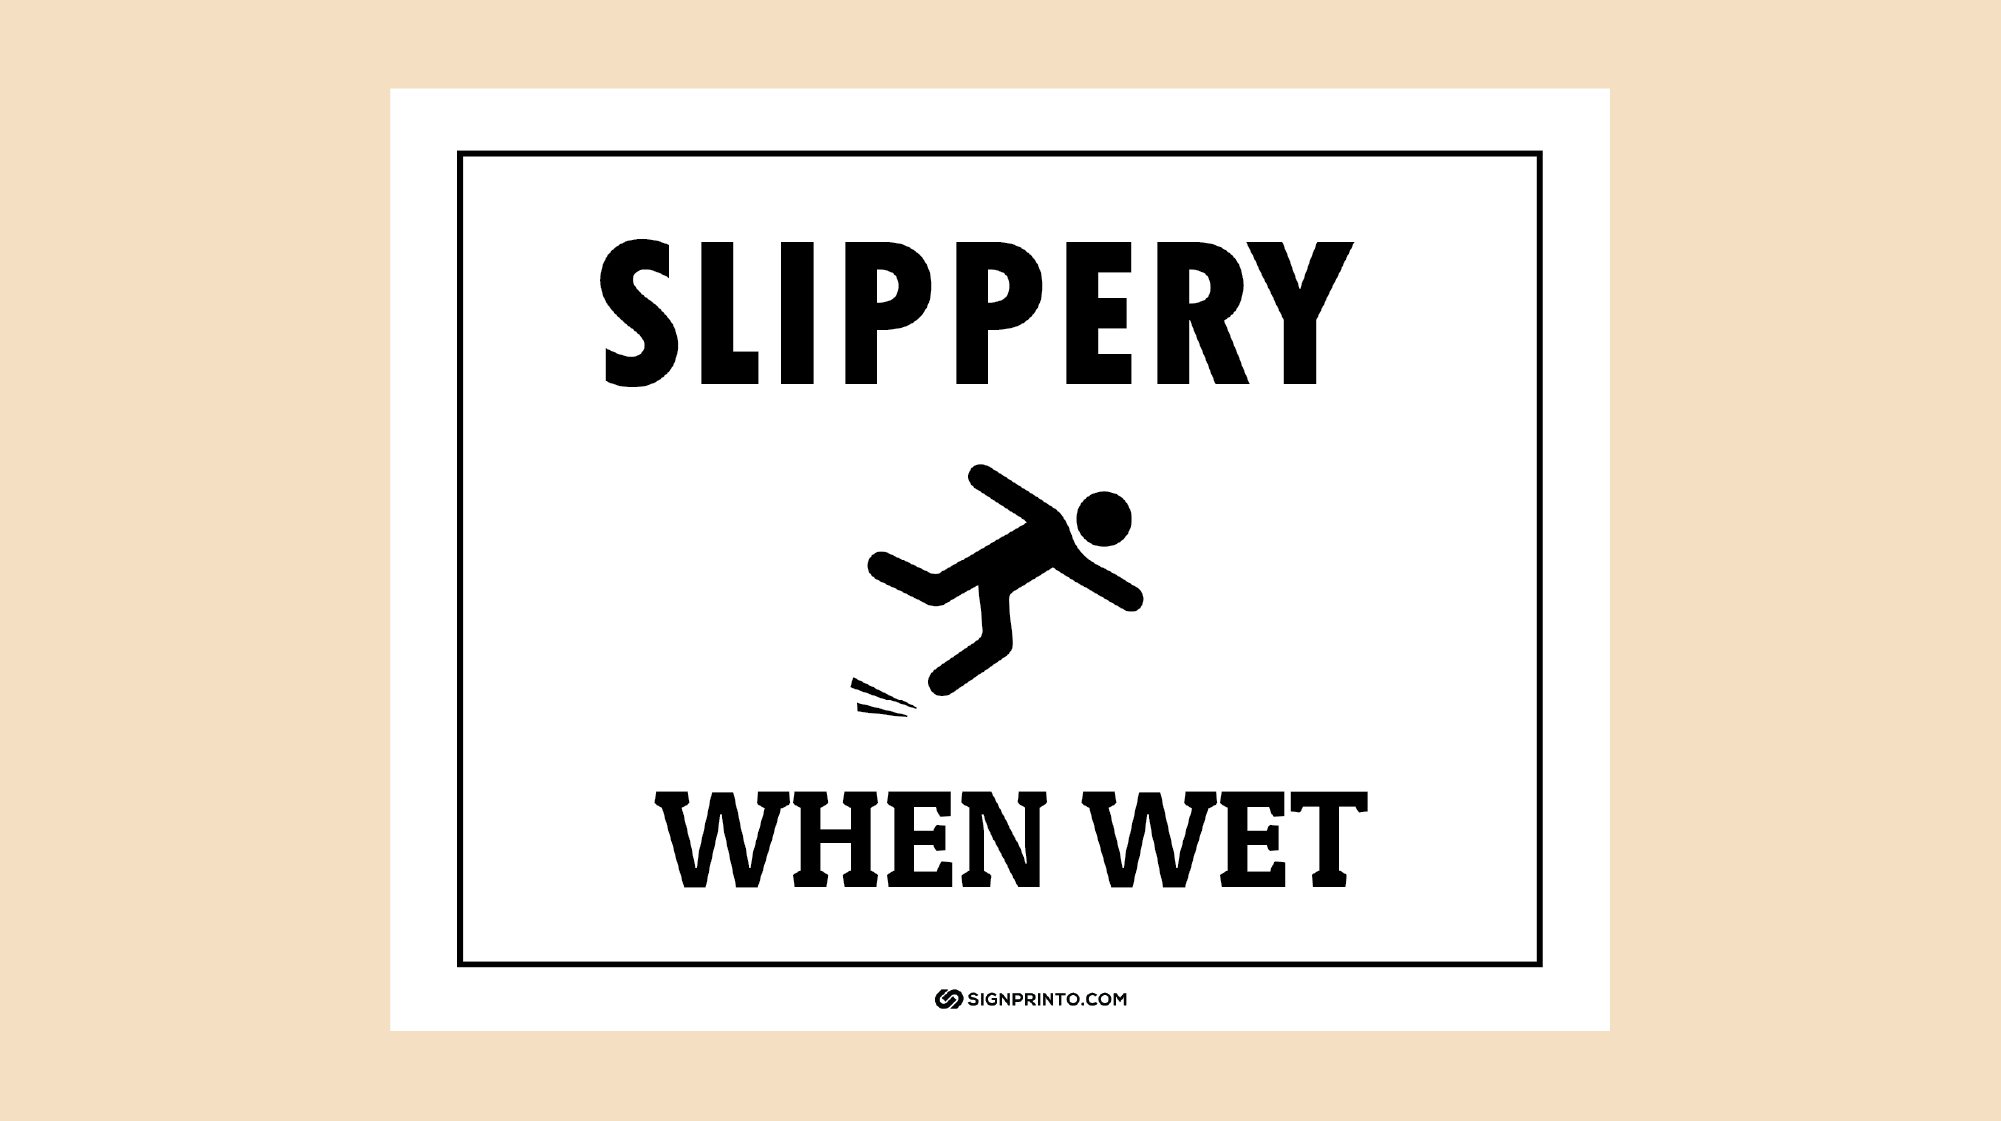 Download Your FREE Slippery When Wet Sign - Printable PDF Included